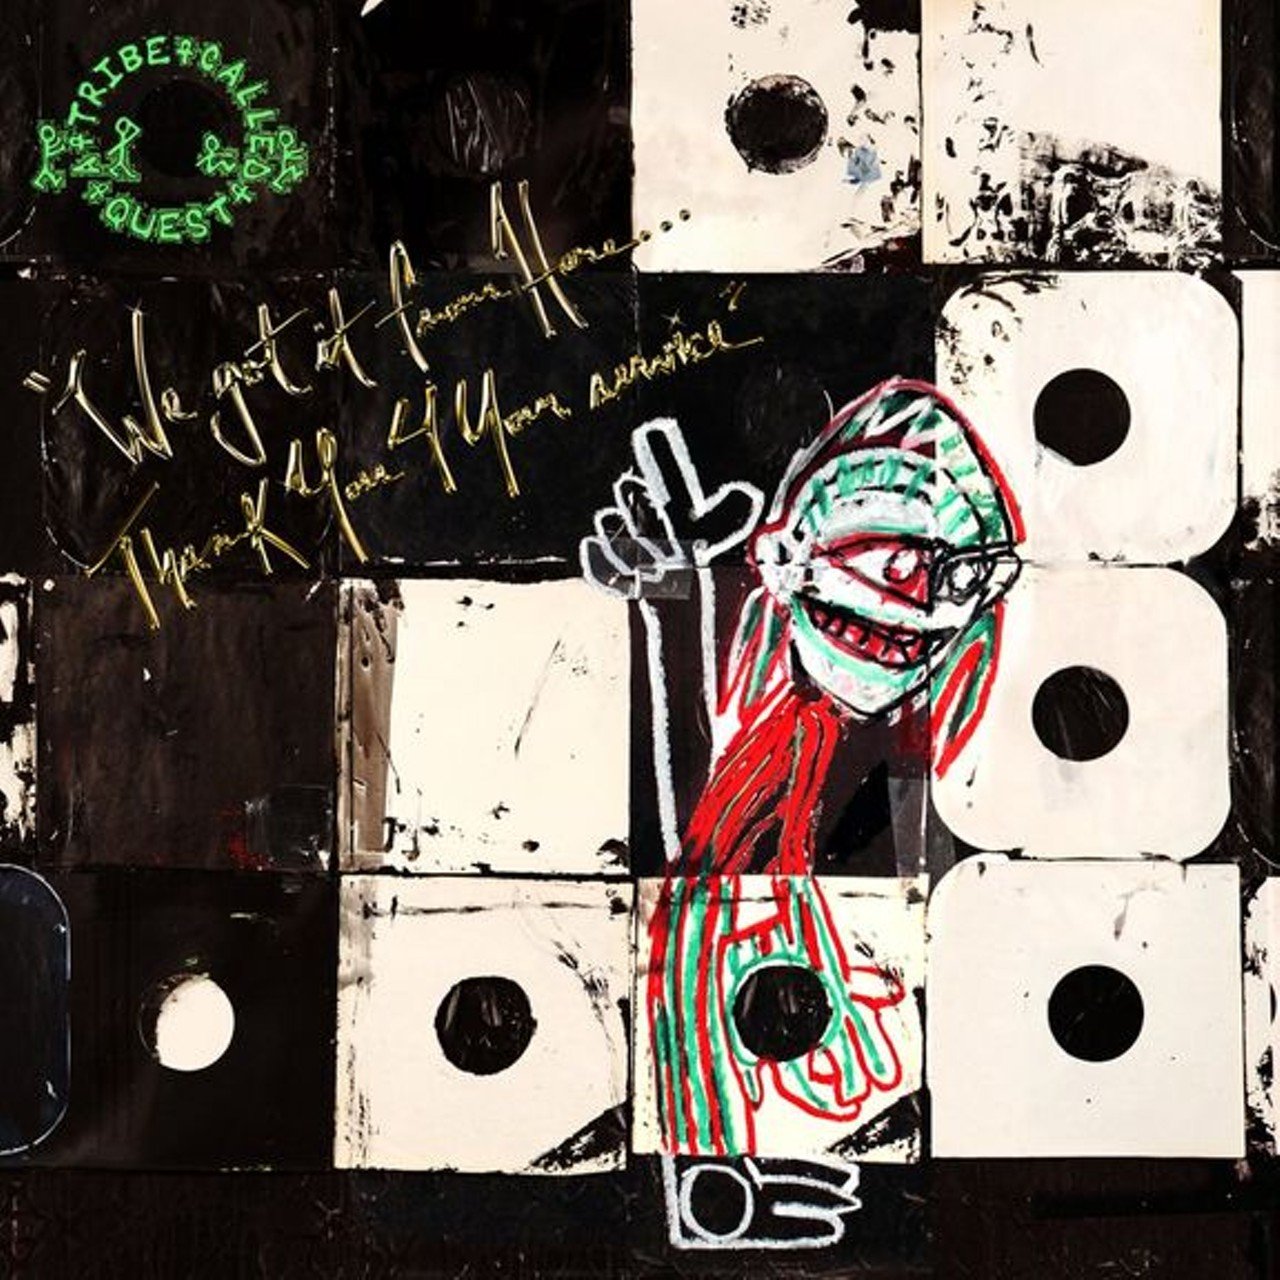 "Mobius" by A Tribe Called Quest 
'Long as they say my name right in the media
If you don't, that's a sin like Cincinnati